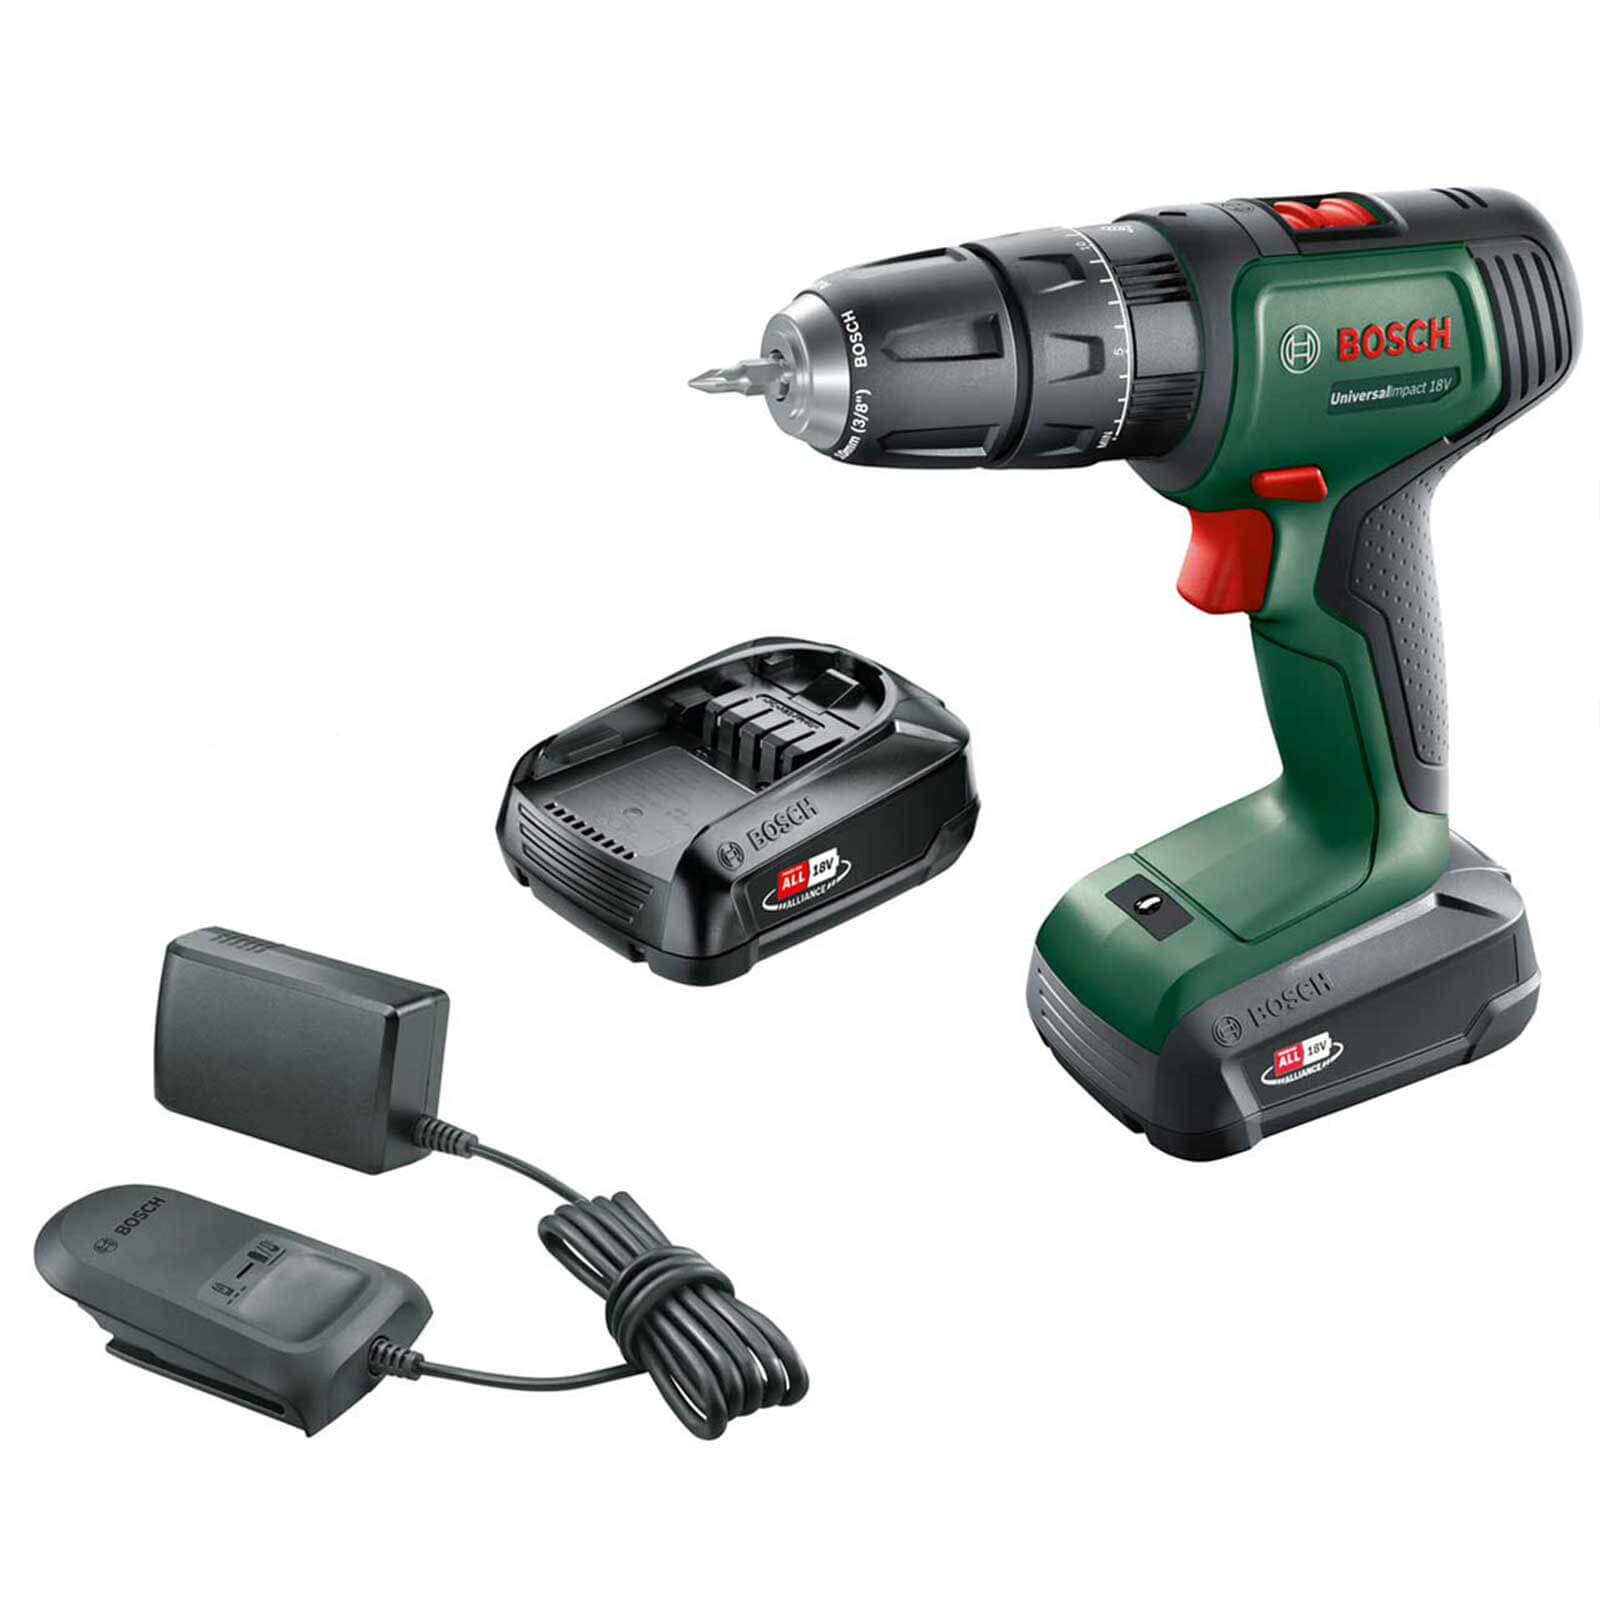 Image of Bosch UNIVERSALIMPACT 18v Cordless Combi Drill 2 x 2.5ah Li-ion Charger No Case